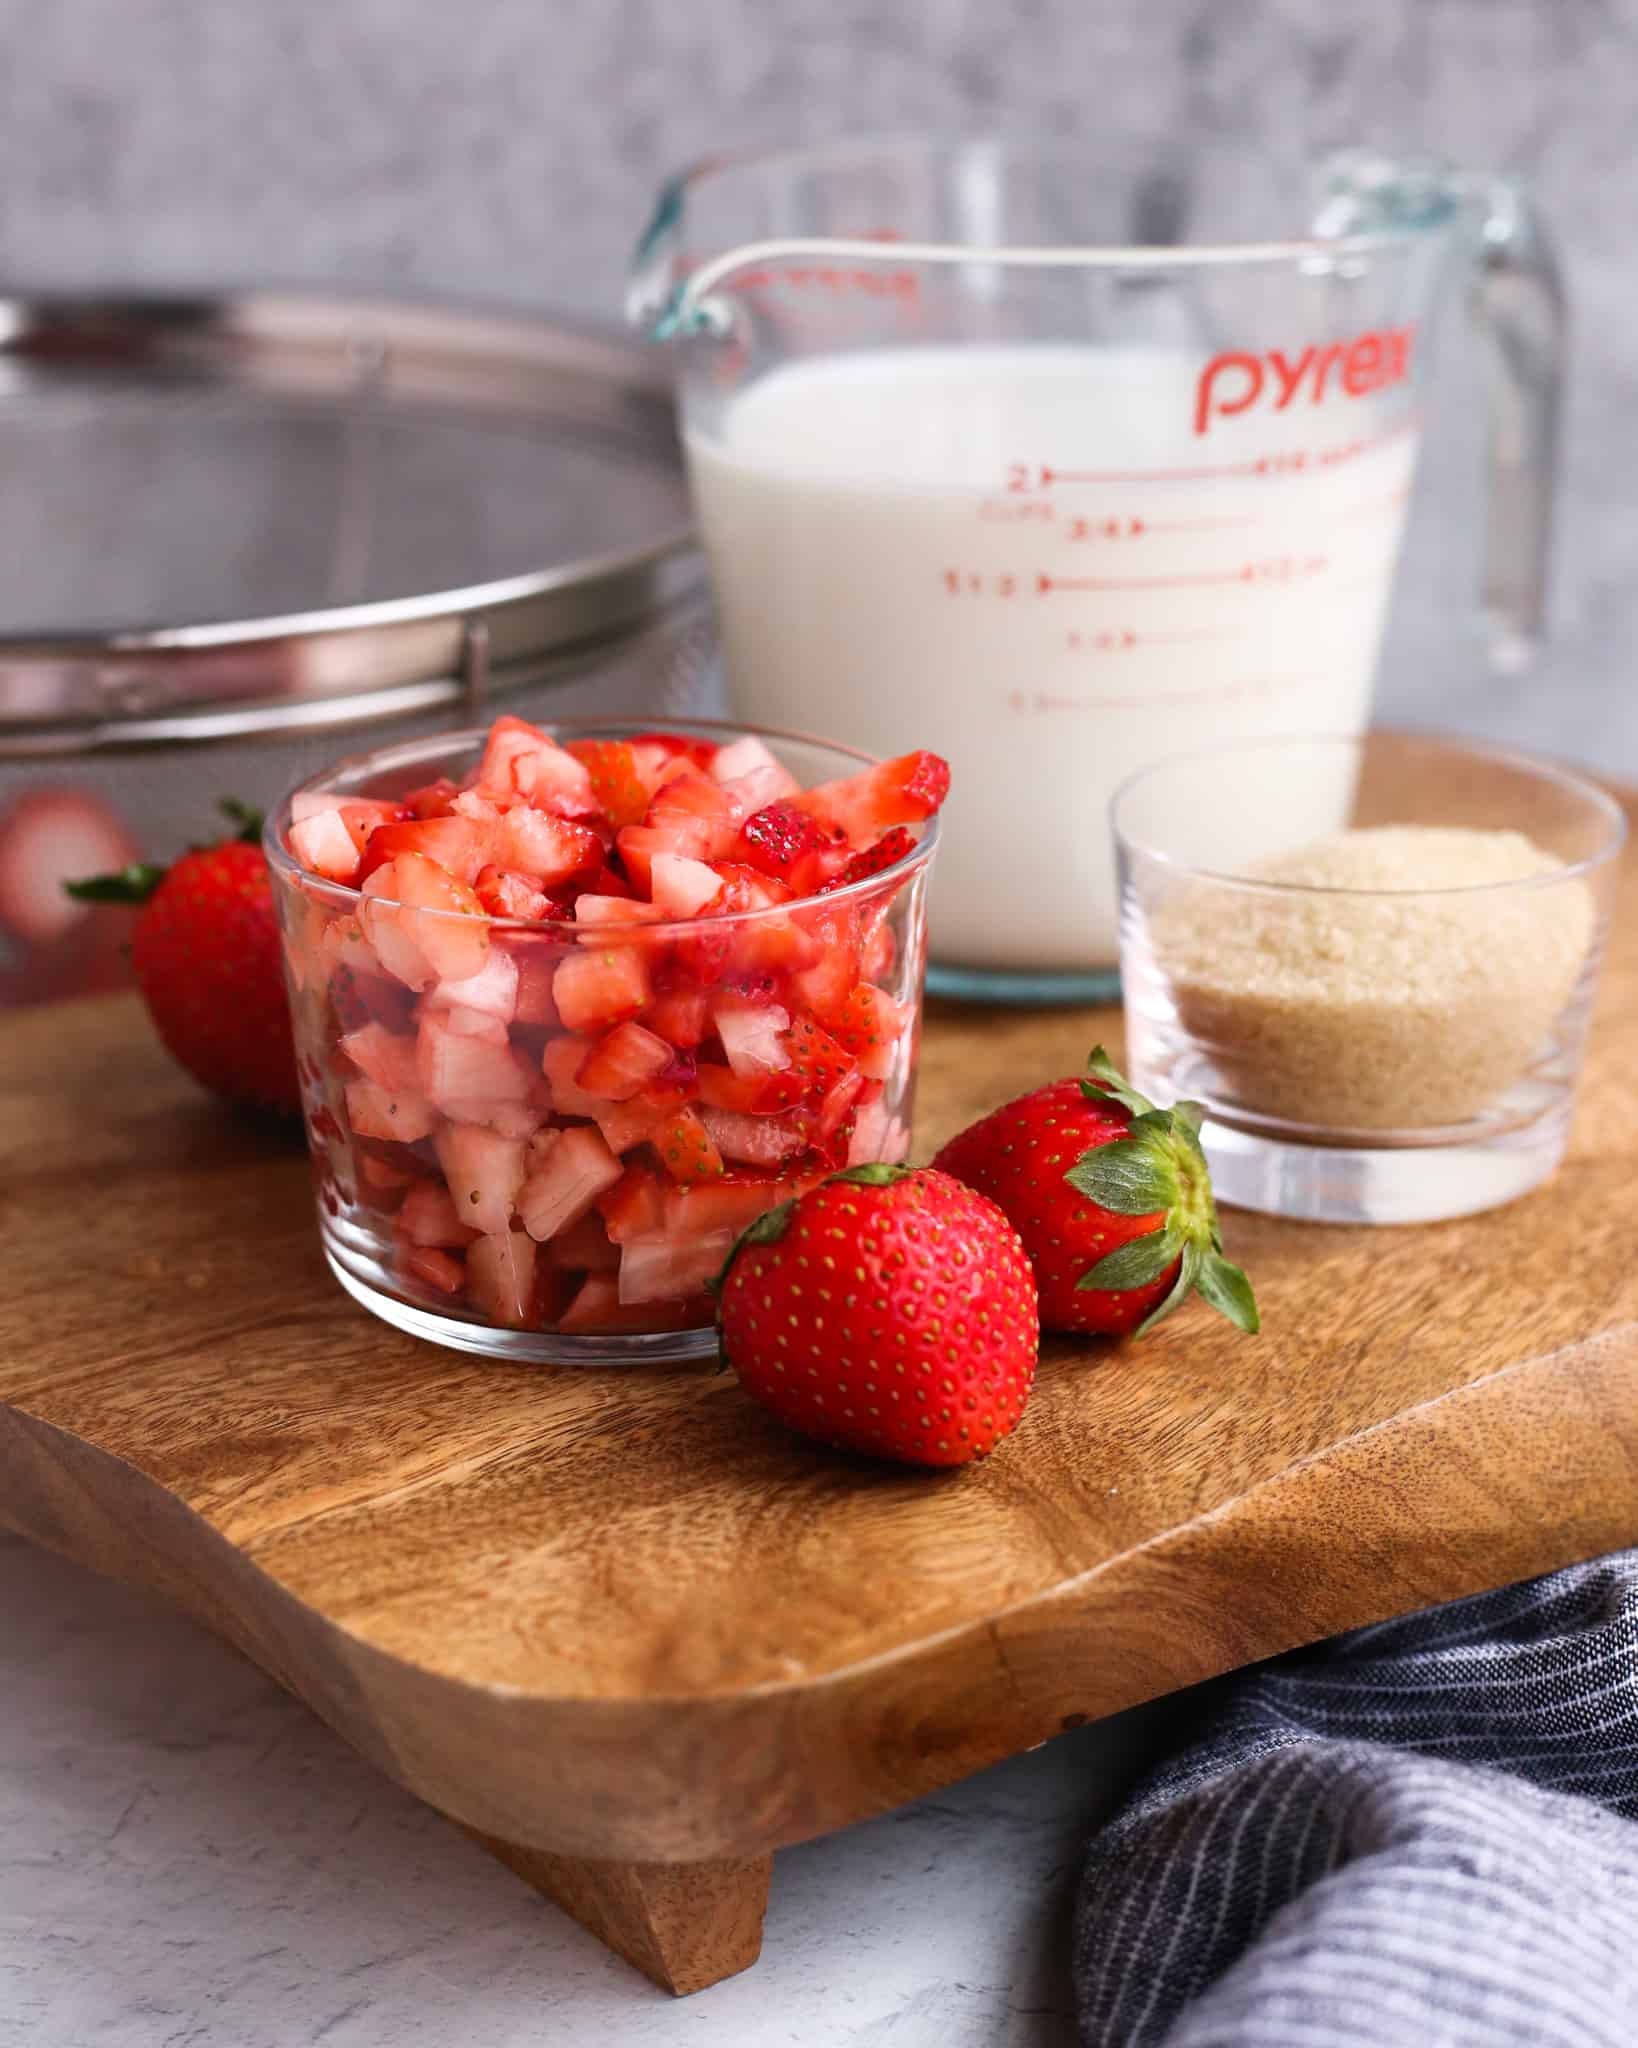 Roughly chopped fresh strawberries in a glass ramekin, shown on a wooden tray with fresh strawberries, turbinado sugar, and whole milk in a clear glass measuring cup